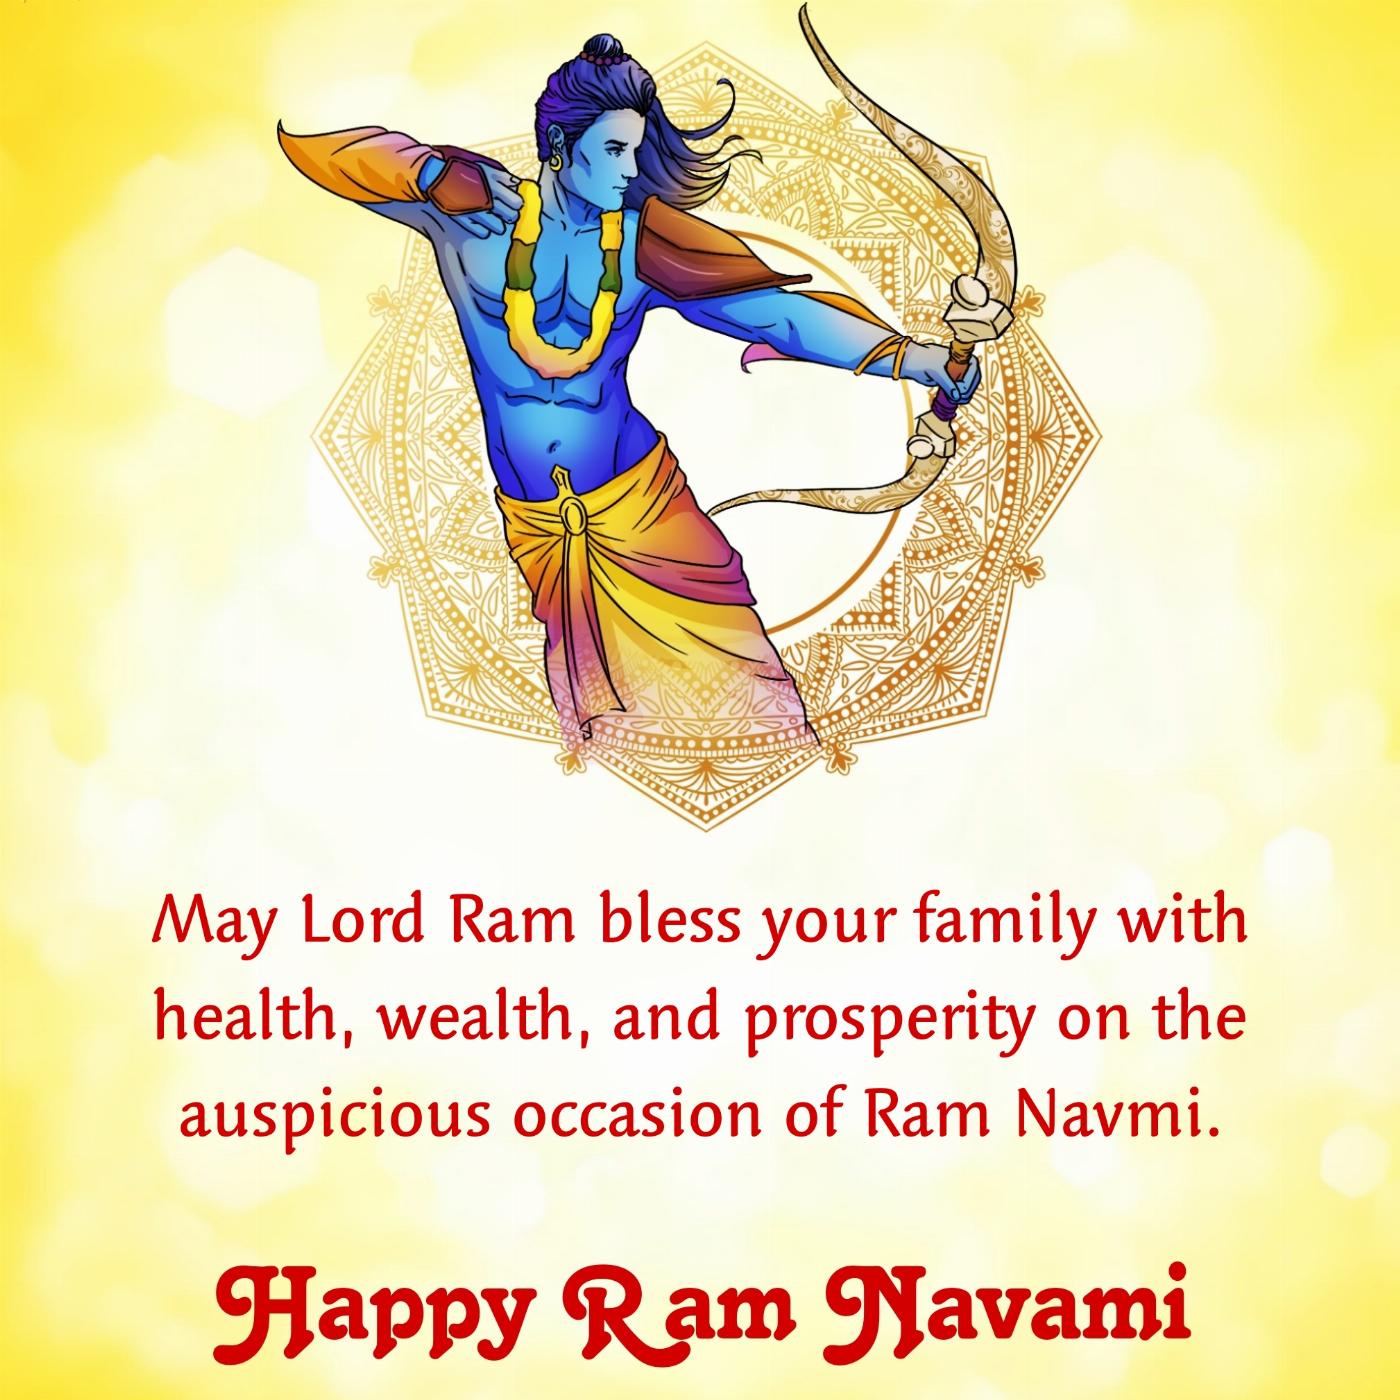 May Lord Ram bless your family with health wealth